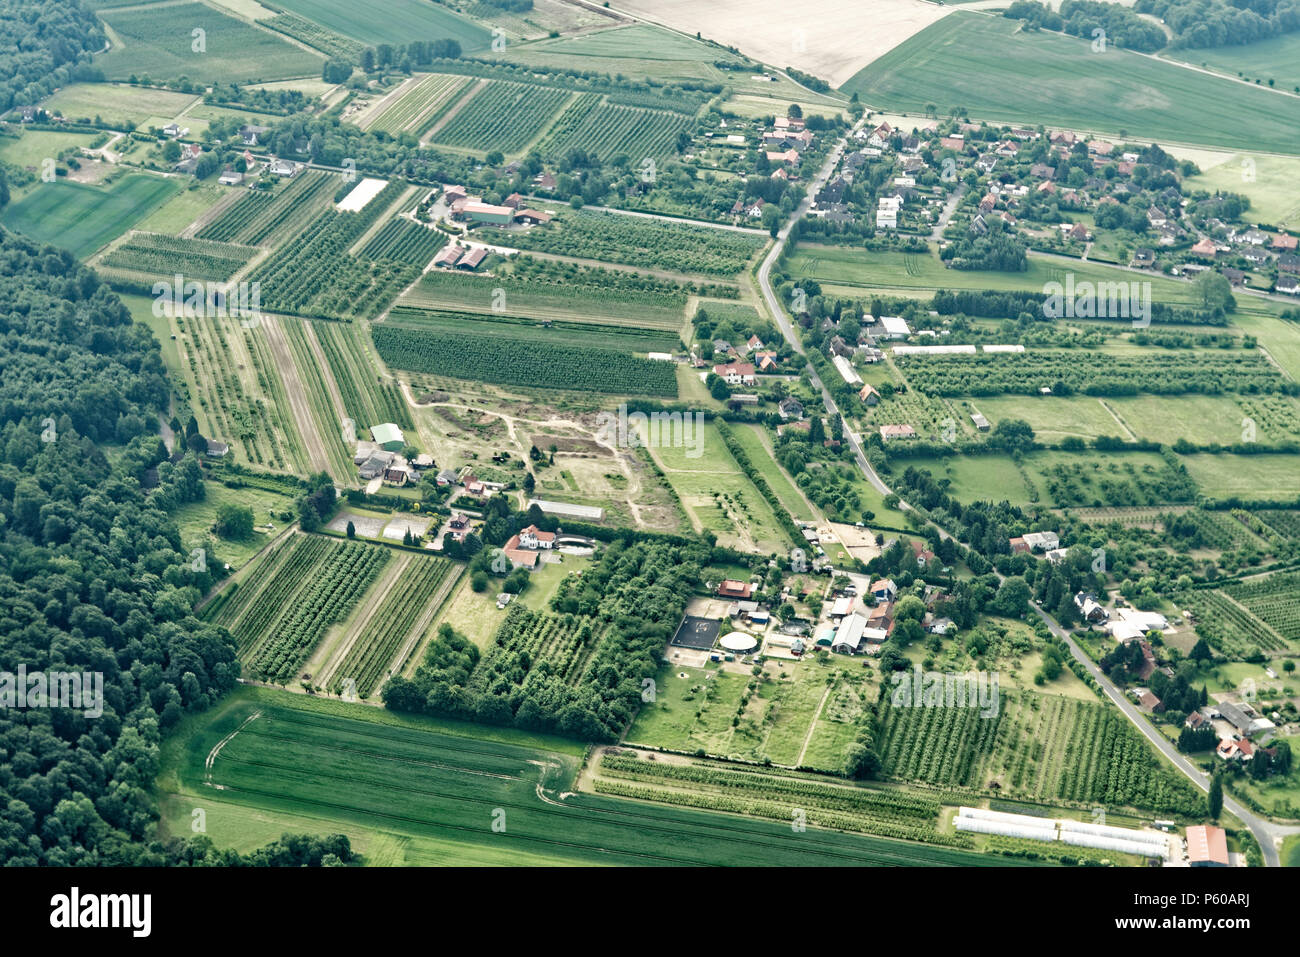 Urban sprawl in the north of Germany with small farmland, roads, houses, commercial enterprises and incoherent woodlands, aerial view Stock Photo